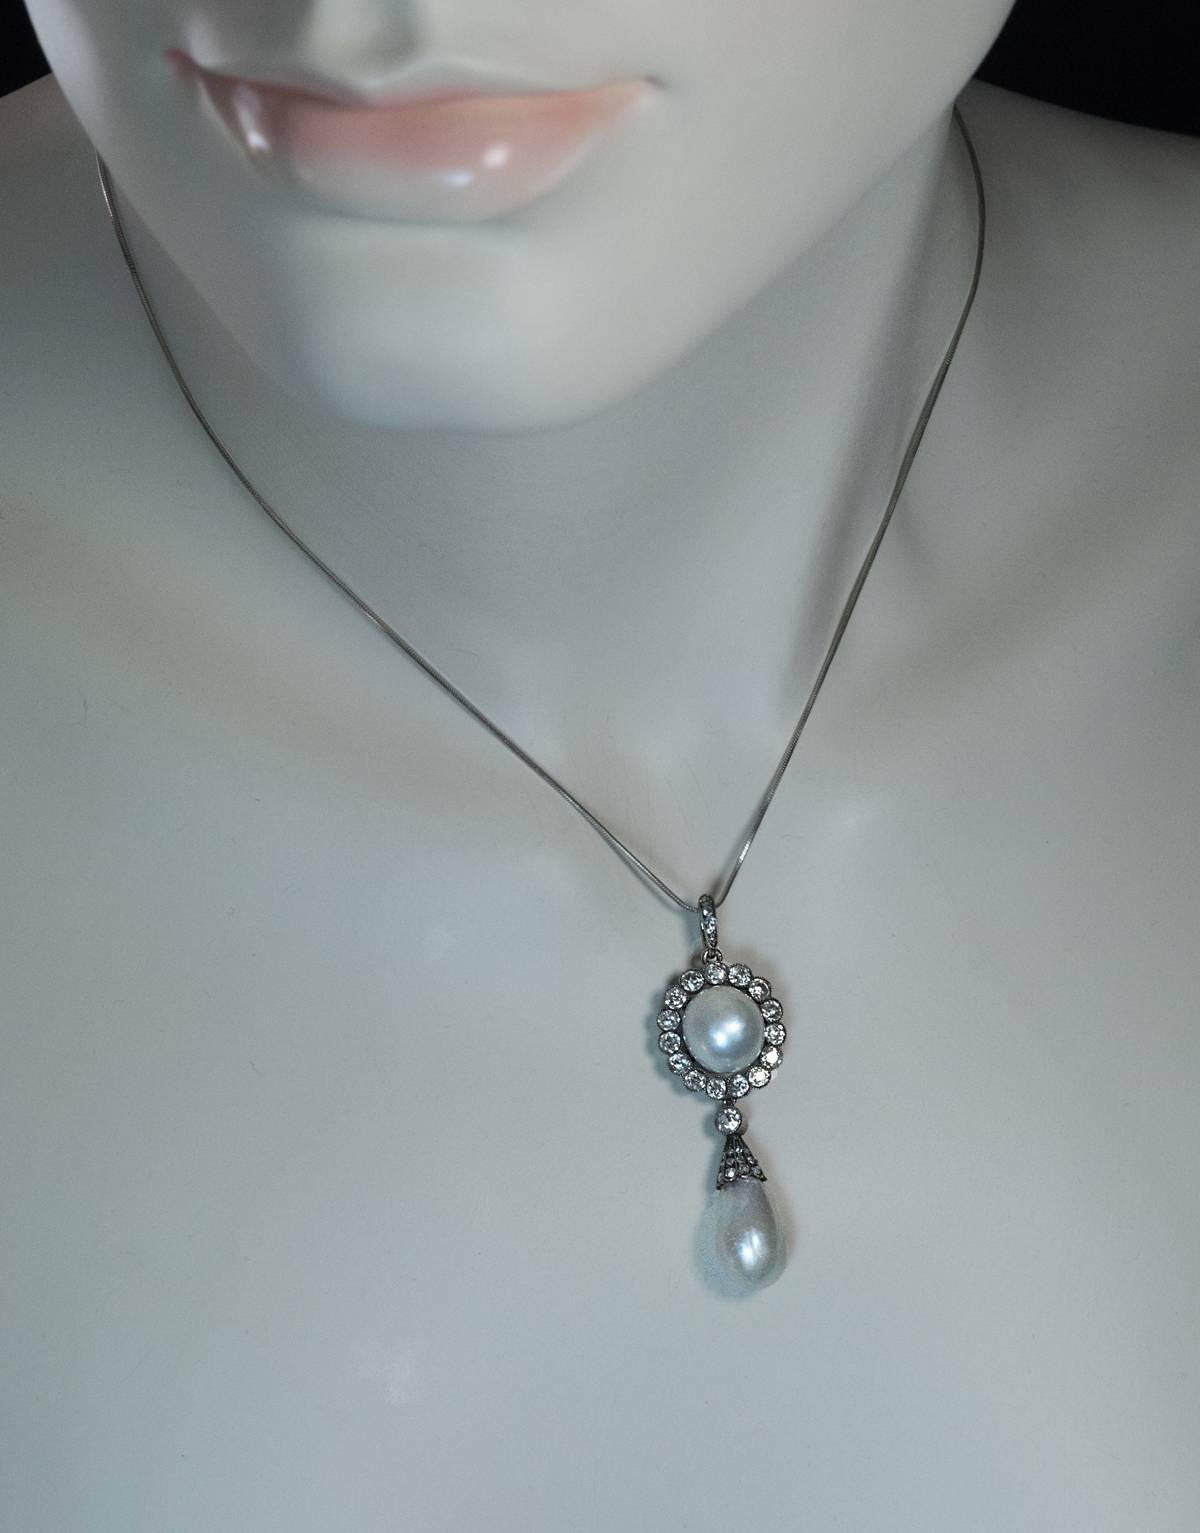 antique pearl and diamond necklace